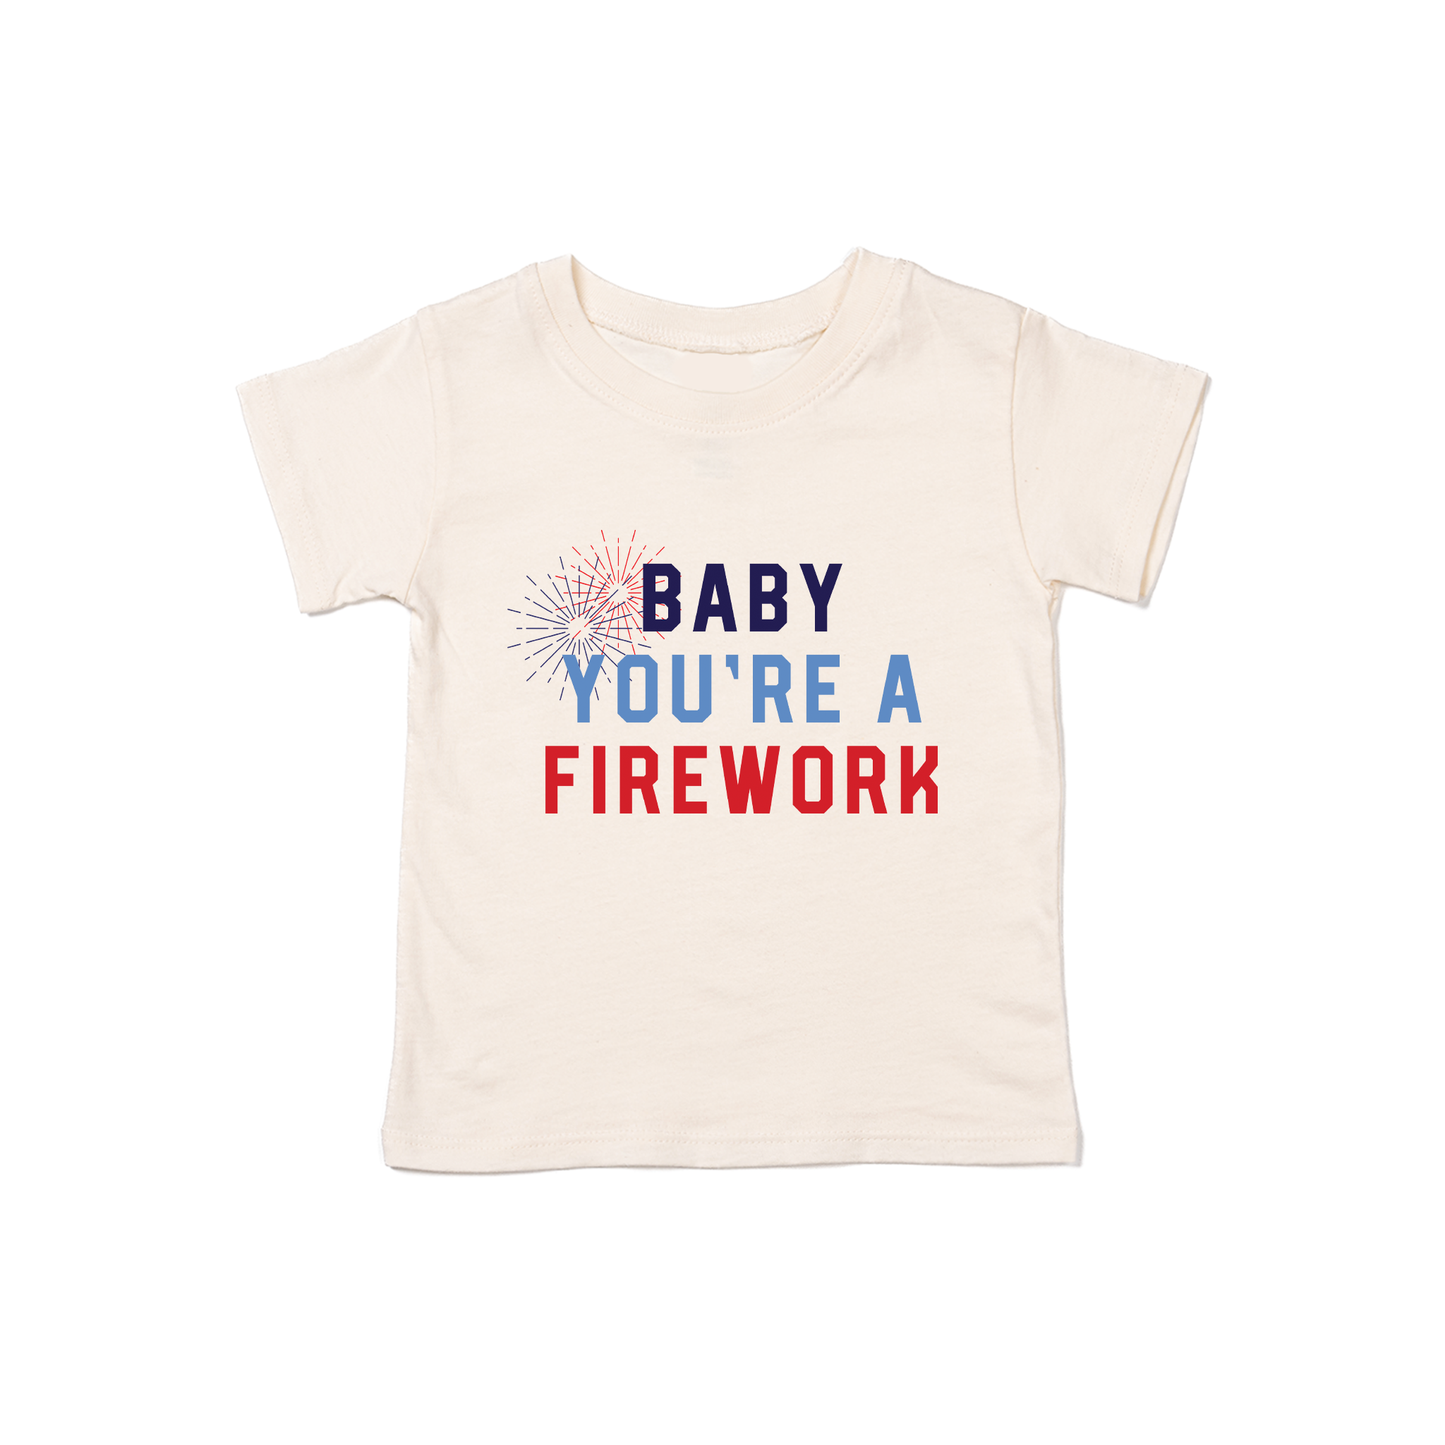 Baby You're A Firework  - Kids Tee (Natural)